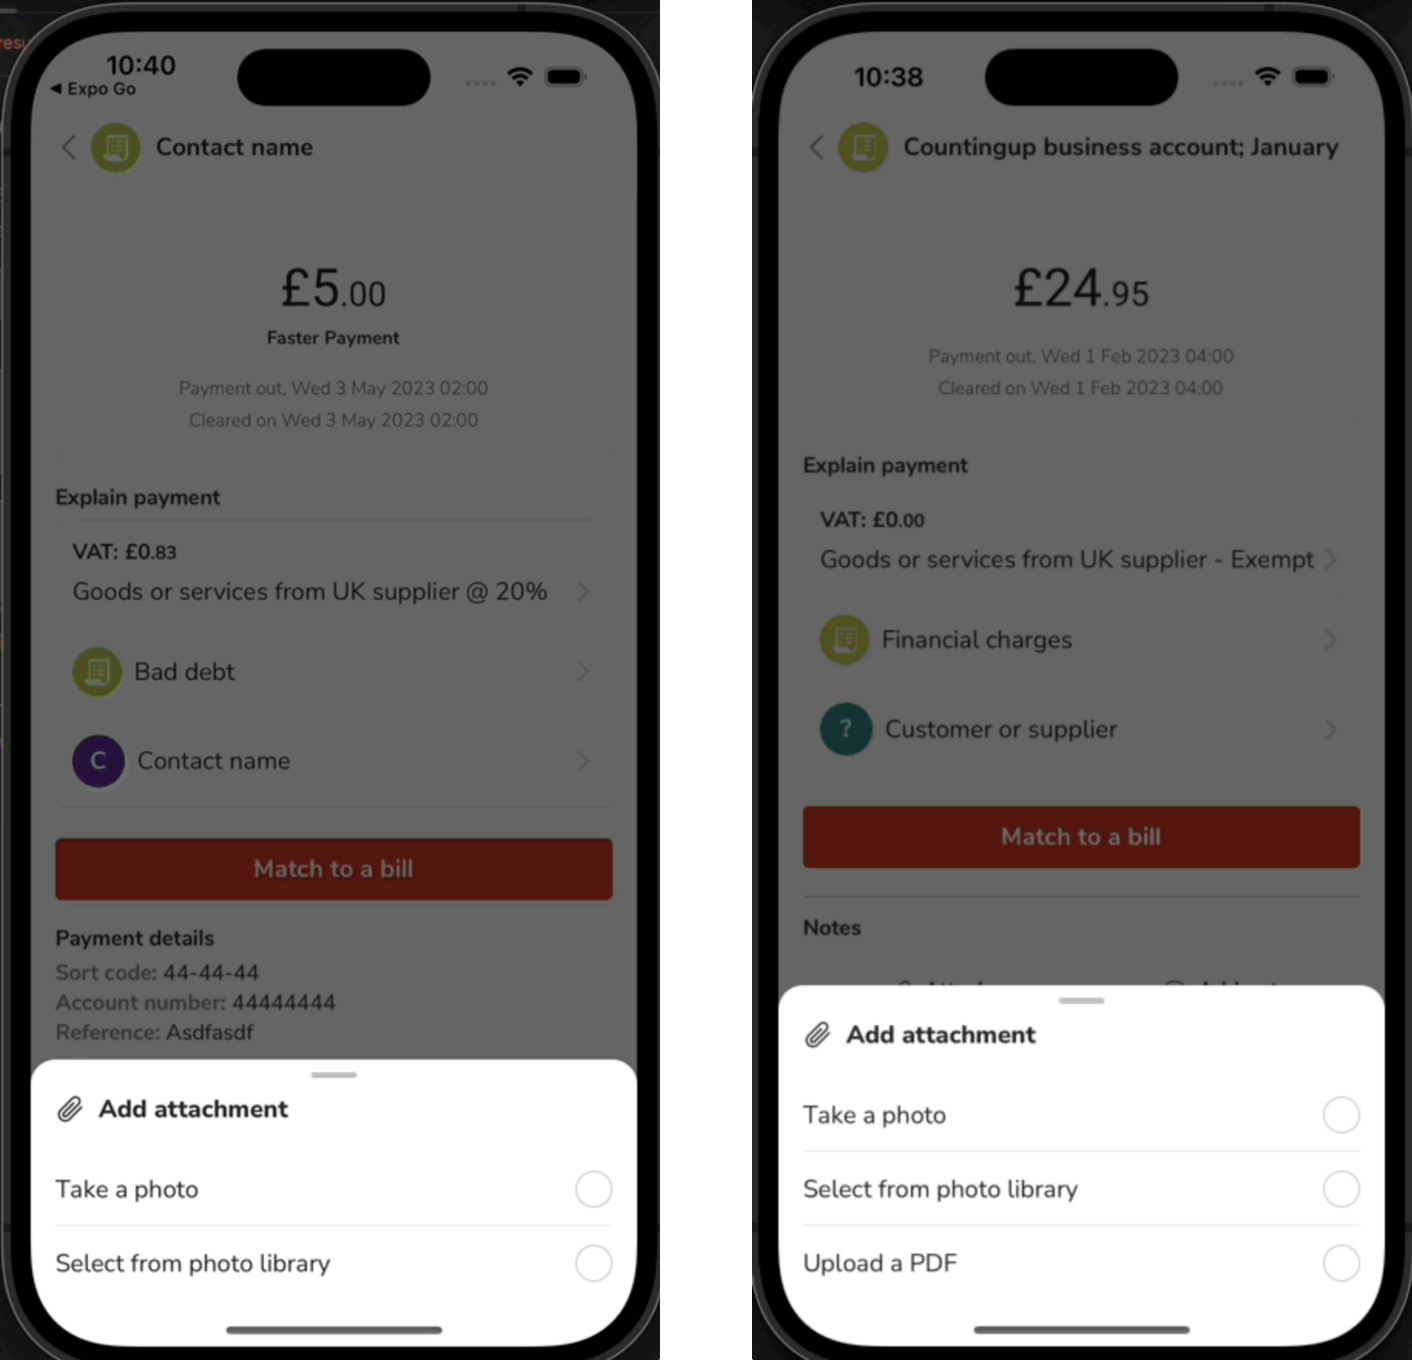 Transaction attachment UI showing old and new UI